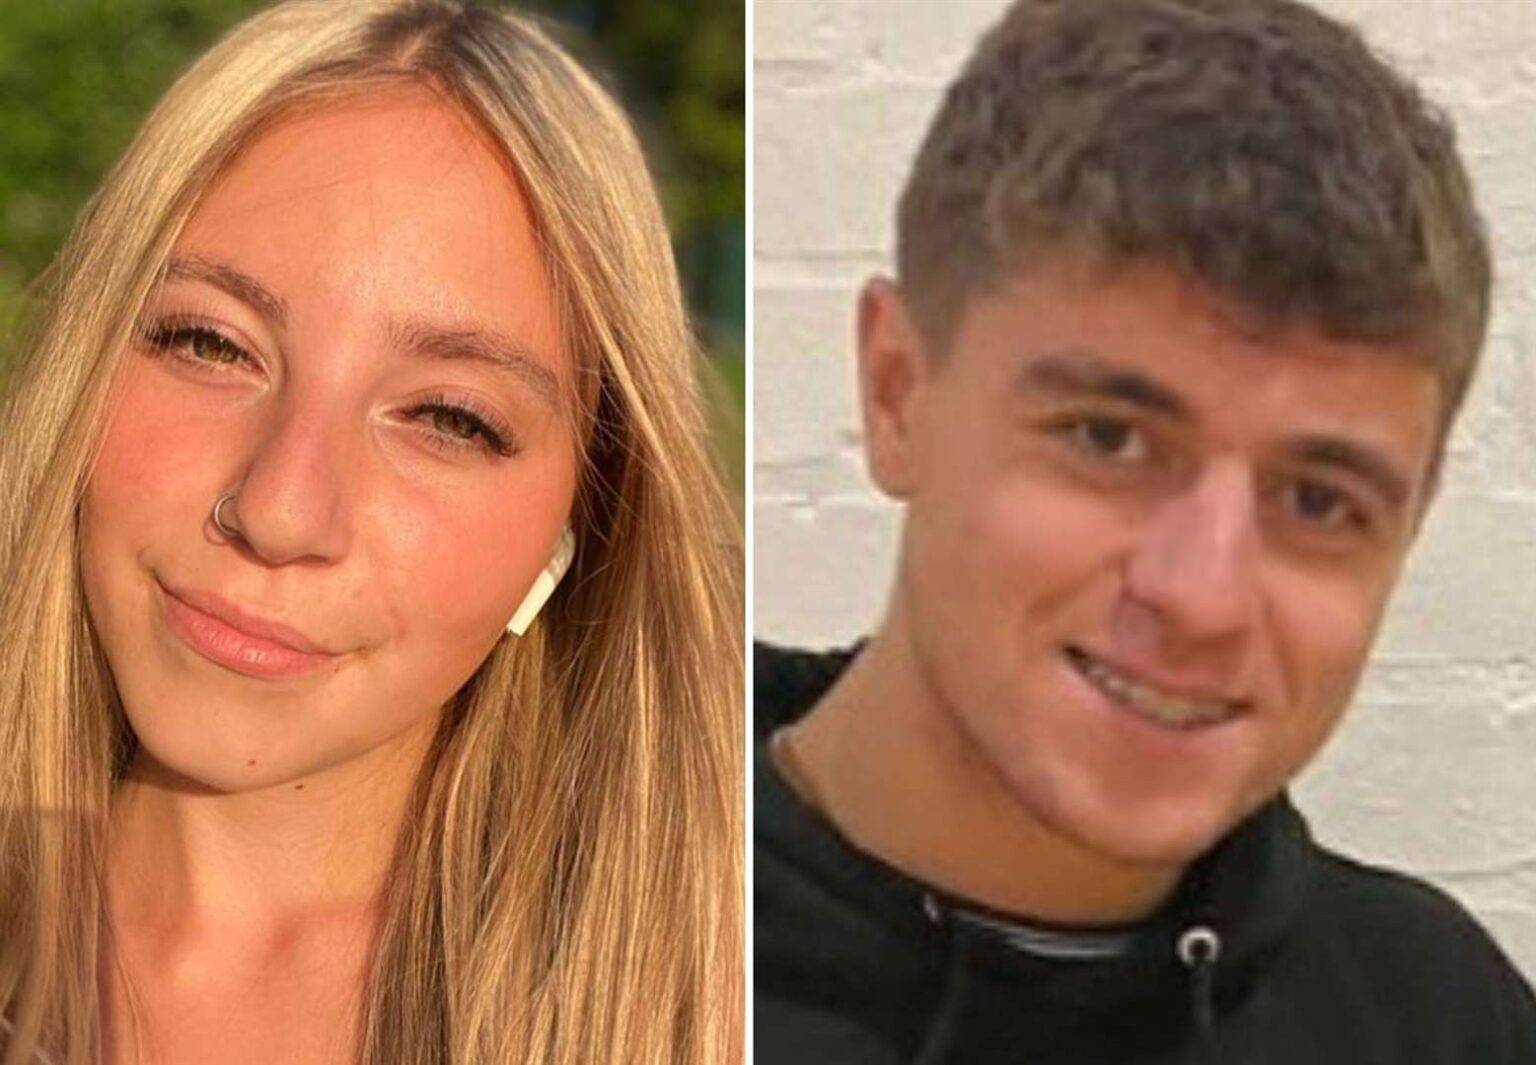 Parents-to-be, 21 & 18, killed in lorry crash died after Give Way sign ‘turned the wrong way’